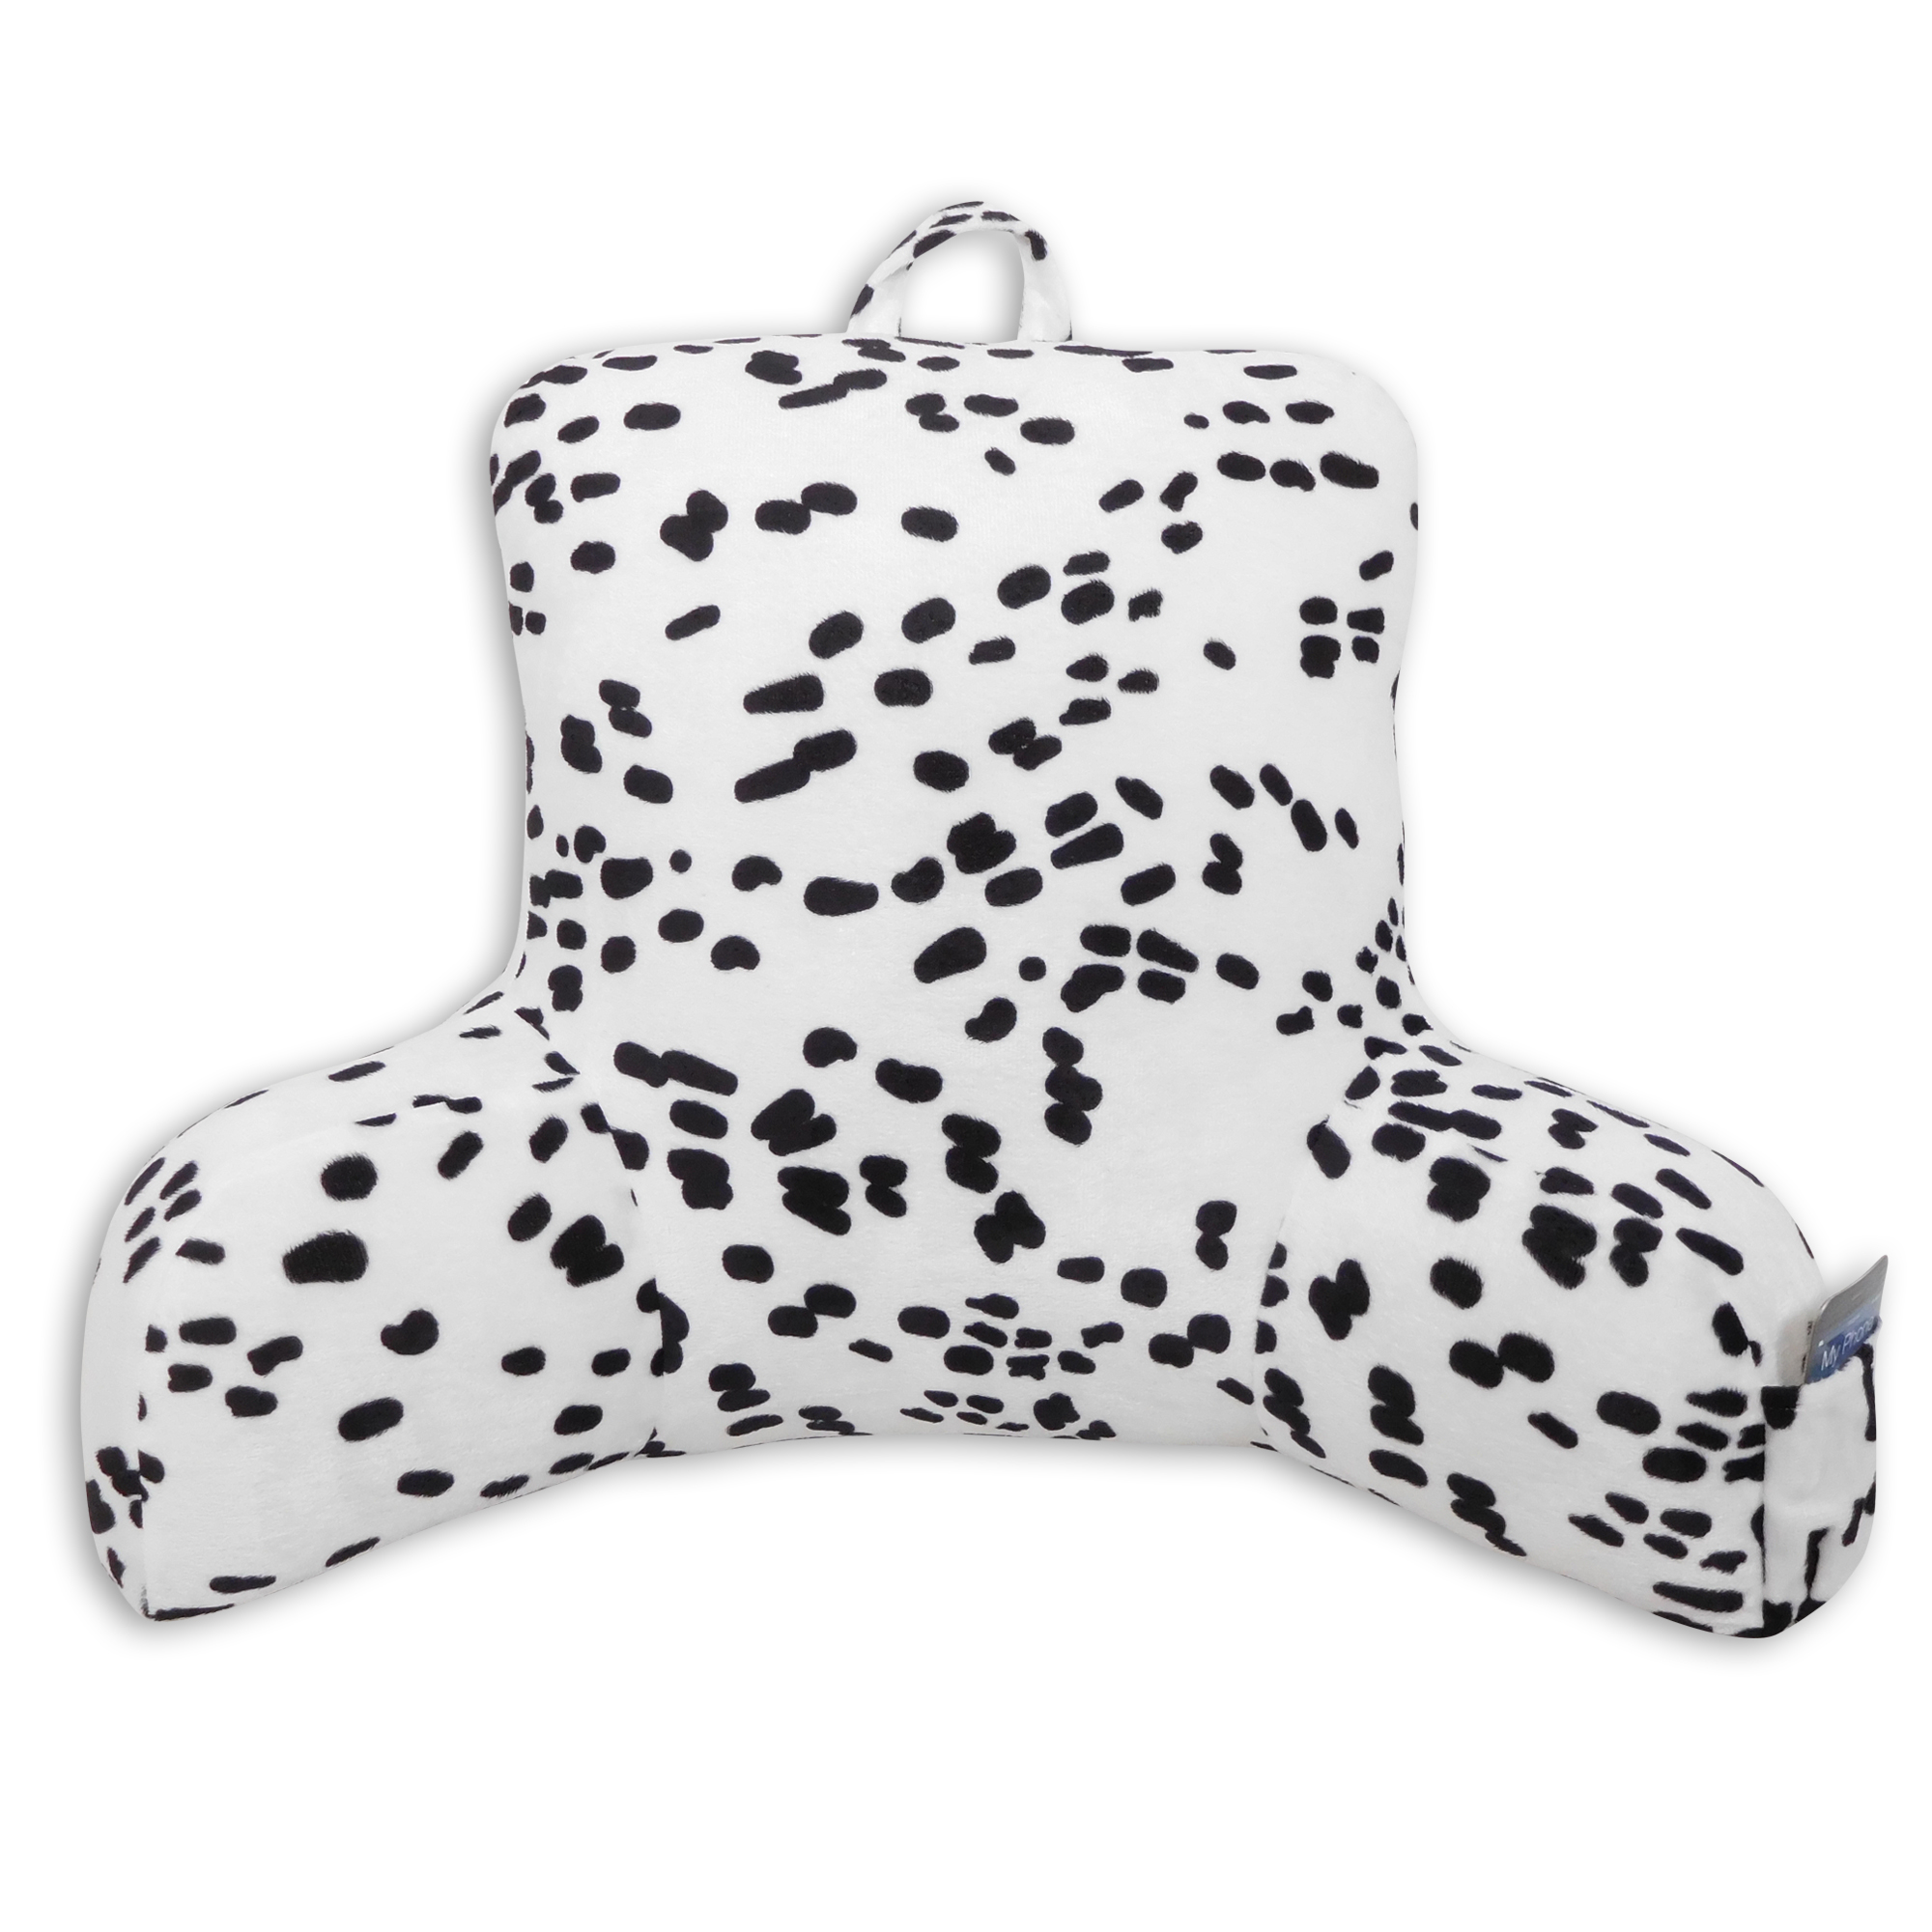 Mainstays Polyester Bed Rest Pillow - image 1 of 4